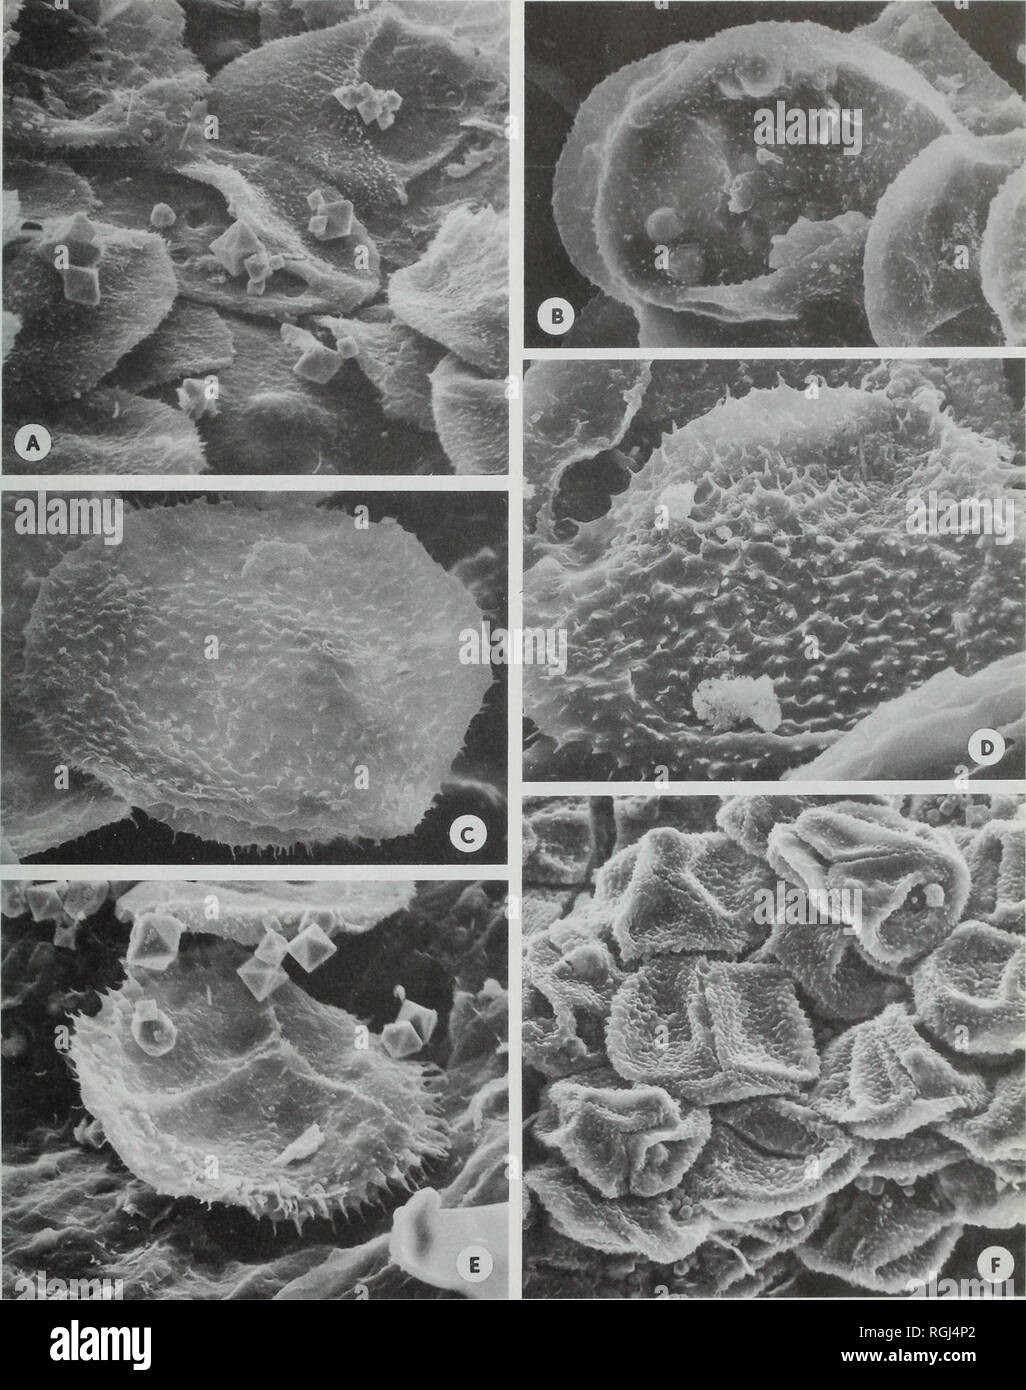 . Bulletin of the British Museum (Natural History), Geology. LECLERCQJA SPORES AND THE A. L1NDLARENSIS MORPHON 135. Fig. 8 Leclercqia complexa from Blenheim-Gilboa, scanning electron photomicrographs of in situ spores; (a-d) Type III; (e) Type IV; (f) Type V; all figures X 1,000, except (f) , X 500. (a) Part of a sporangial mass showing spores with small curvatural spinae and distal coni. 45A, tilt 90°. (b) Detail of spores from another sporangium showing sculpture of grana and coni, 181 A, tilt 0°. (c-d) Specimens showing larger distal sculpture borne by mural ridges or separated by lacunae,  Stock Photo